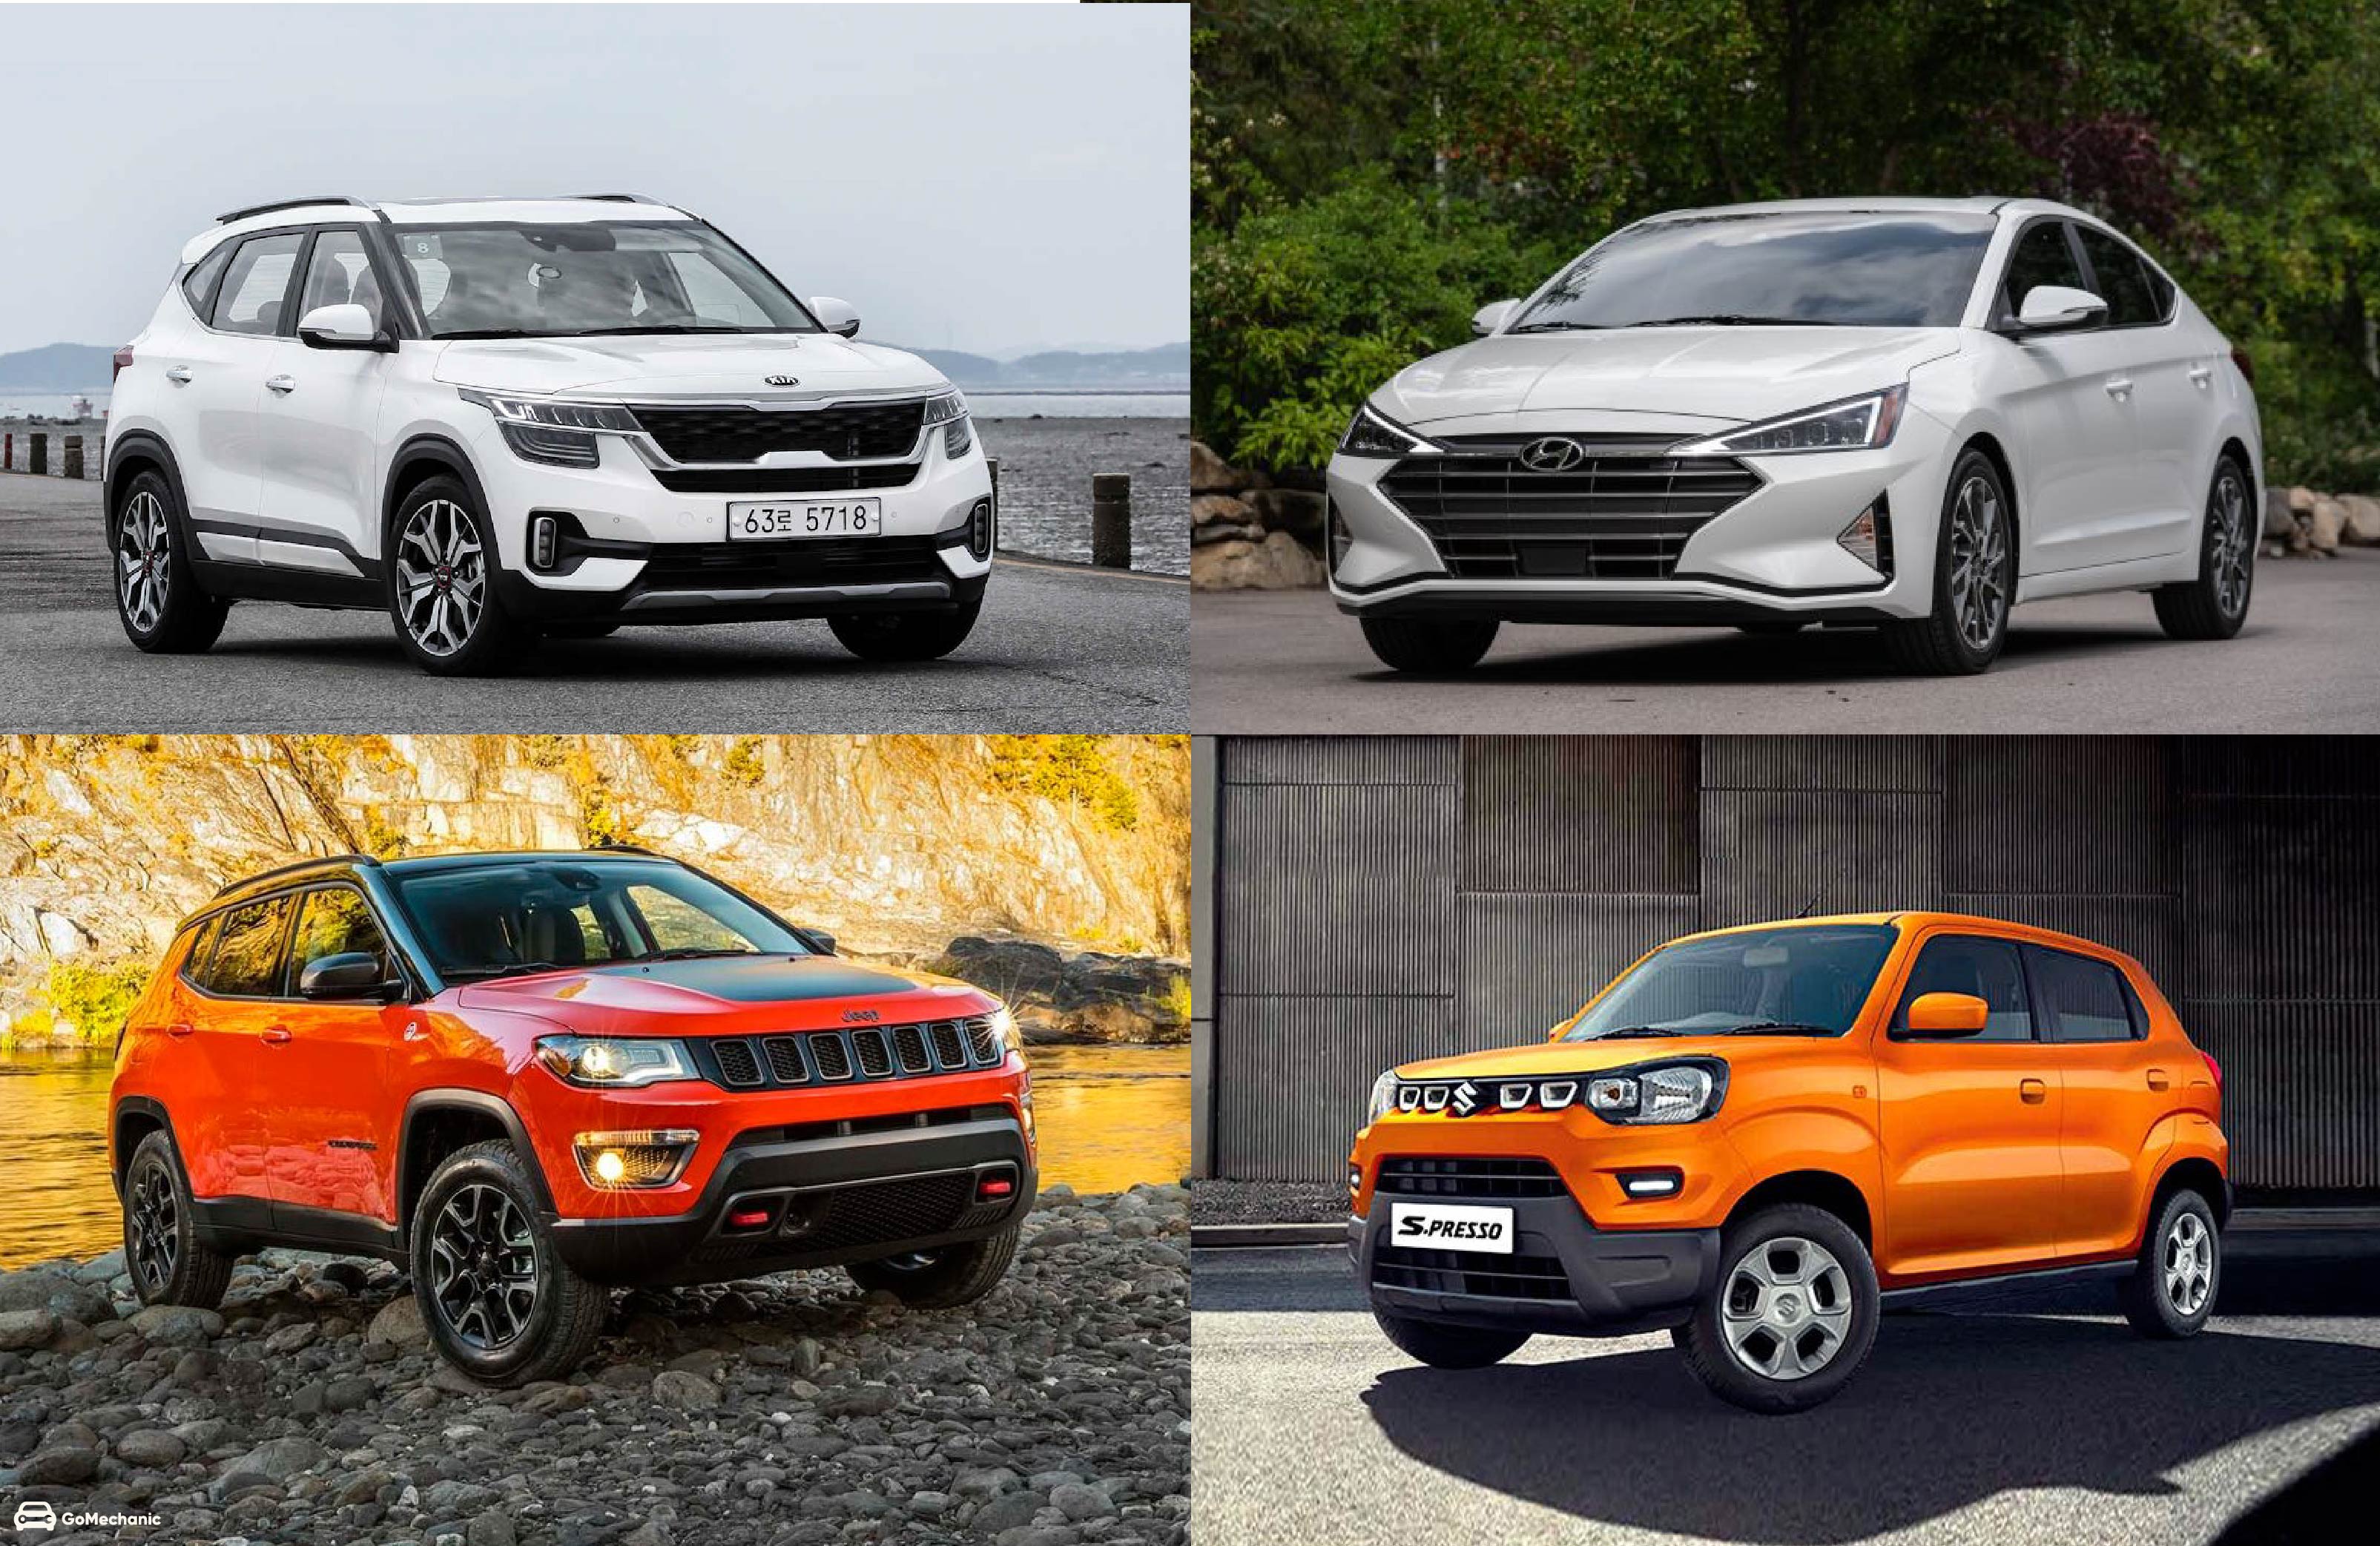 10 Best BS6 (Bharat Stage 6) Cars In India